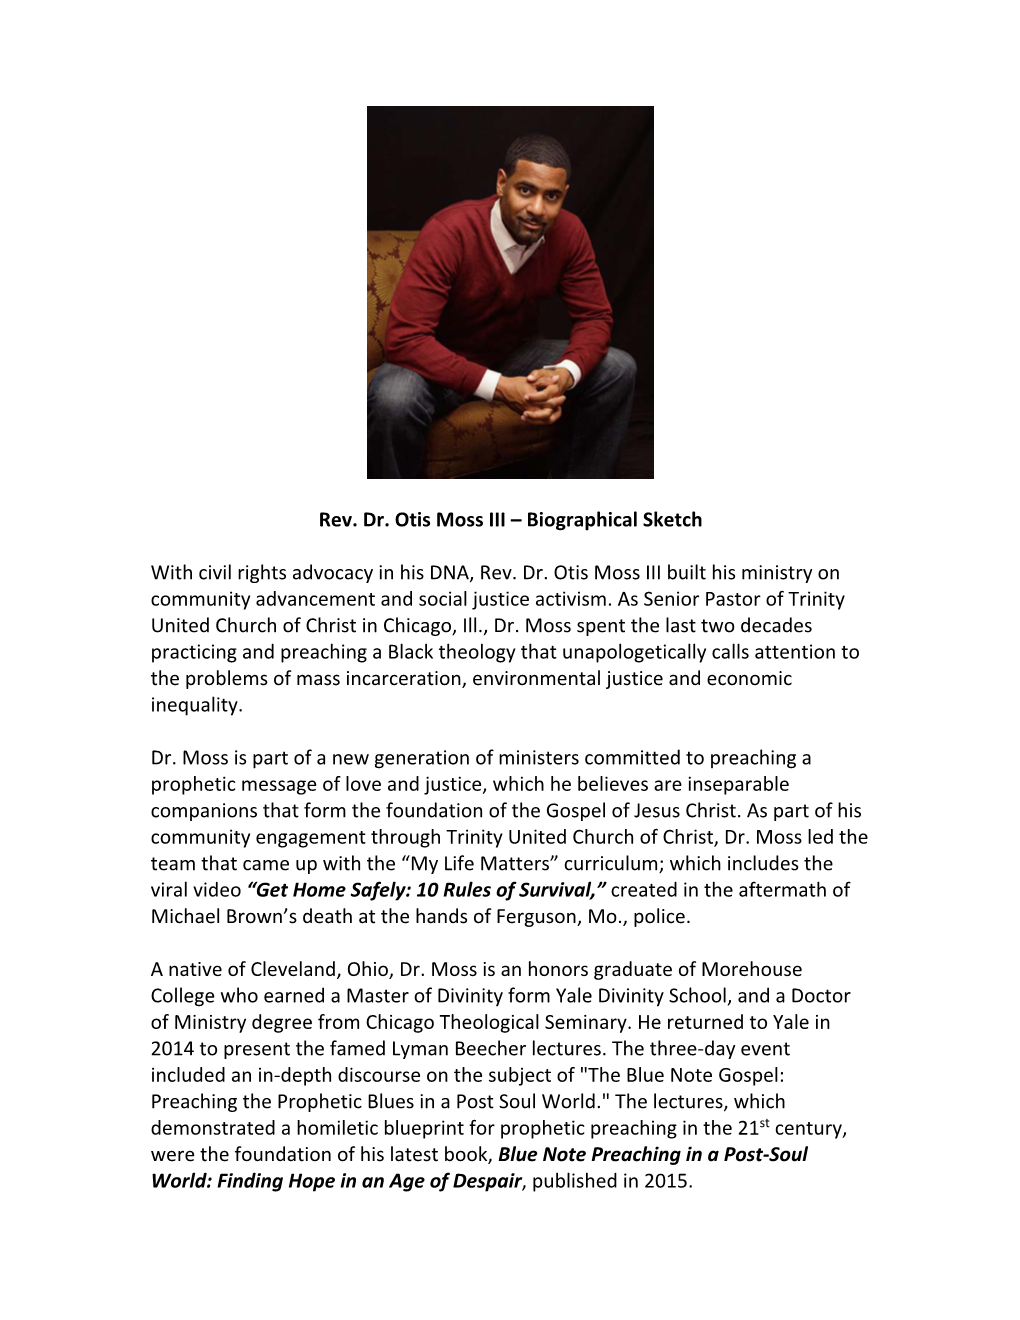 Rev. Dr. Otis Moss III – Biographical Sketch with Civil Rights Advocacy In